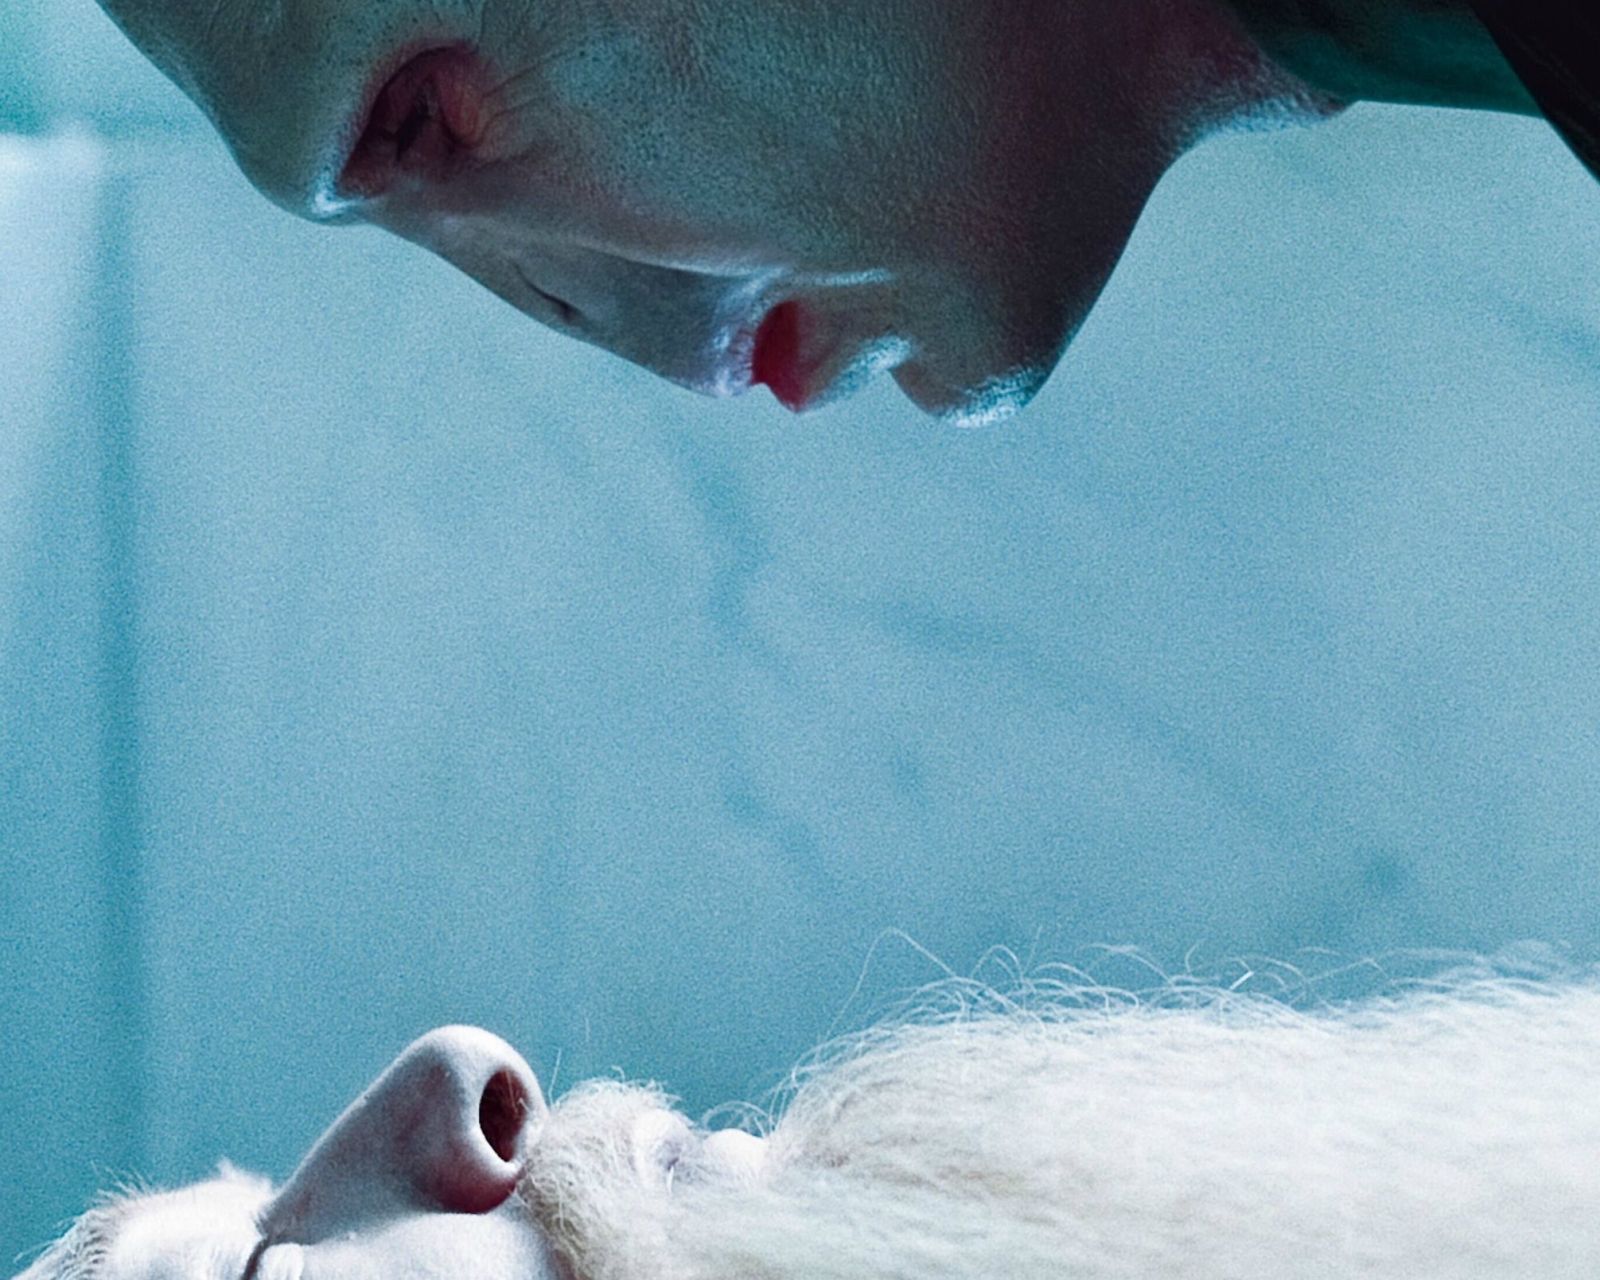 albus dumbledore, movie, harry potter and the deathly hallows: part 1, lord voldemort, harry potter